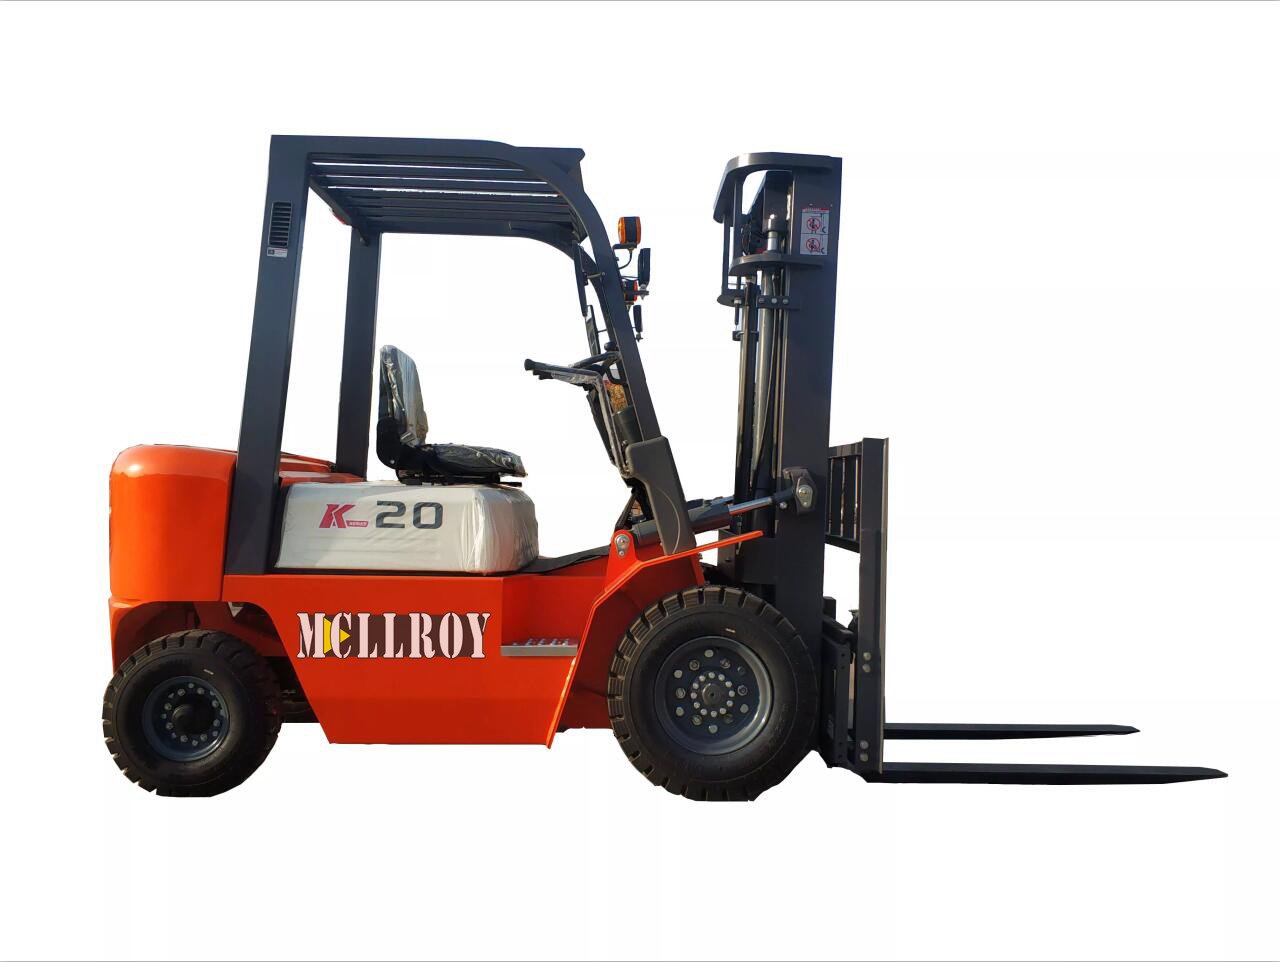 40KW Diesel Powered Forklift , Small Forklift Truck 3000mm Lift Height